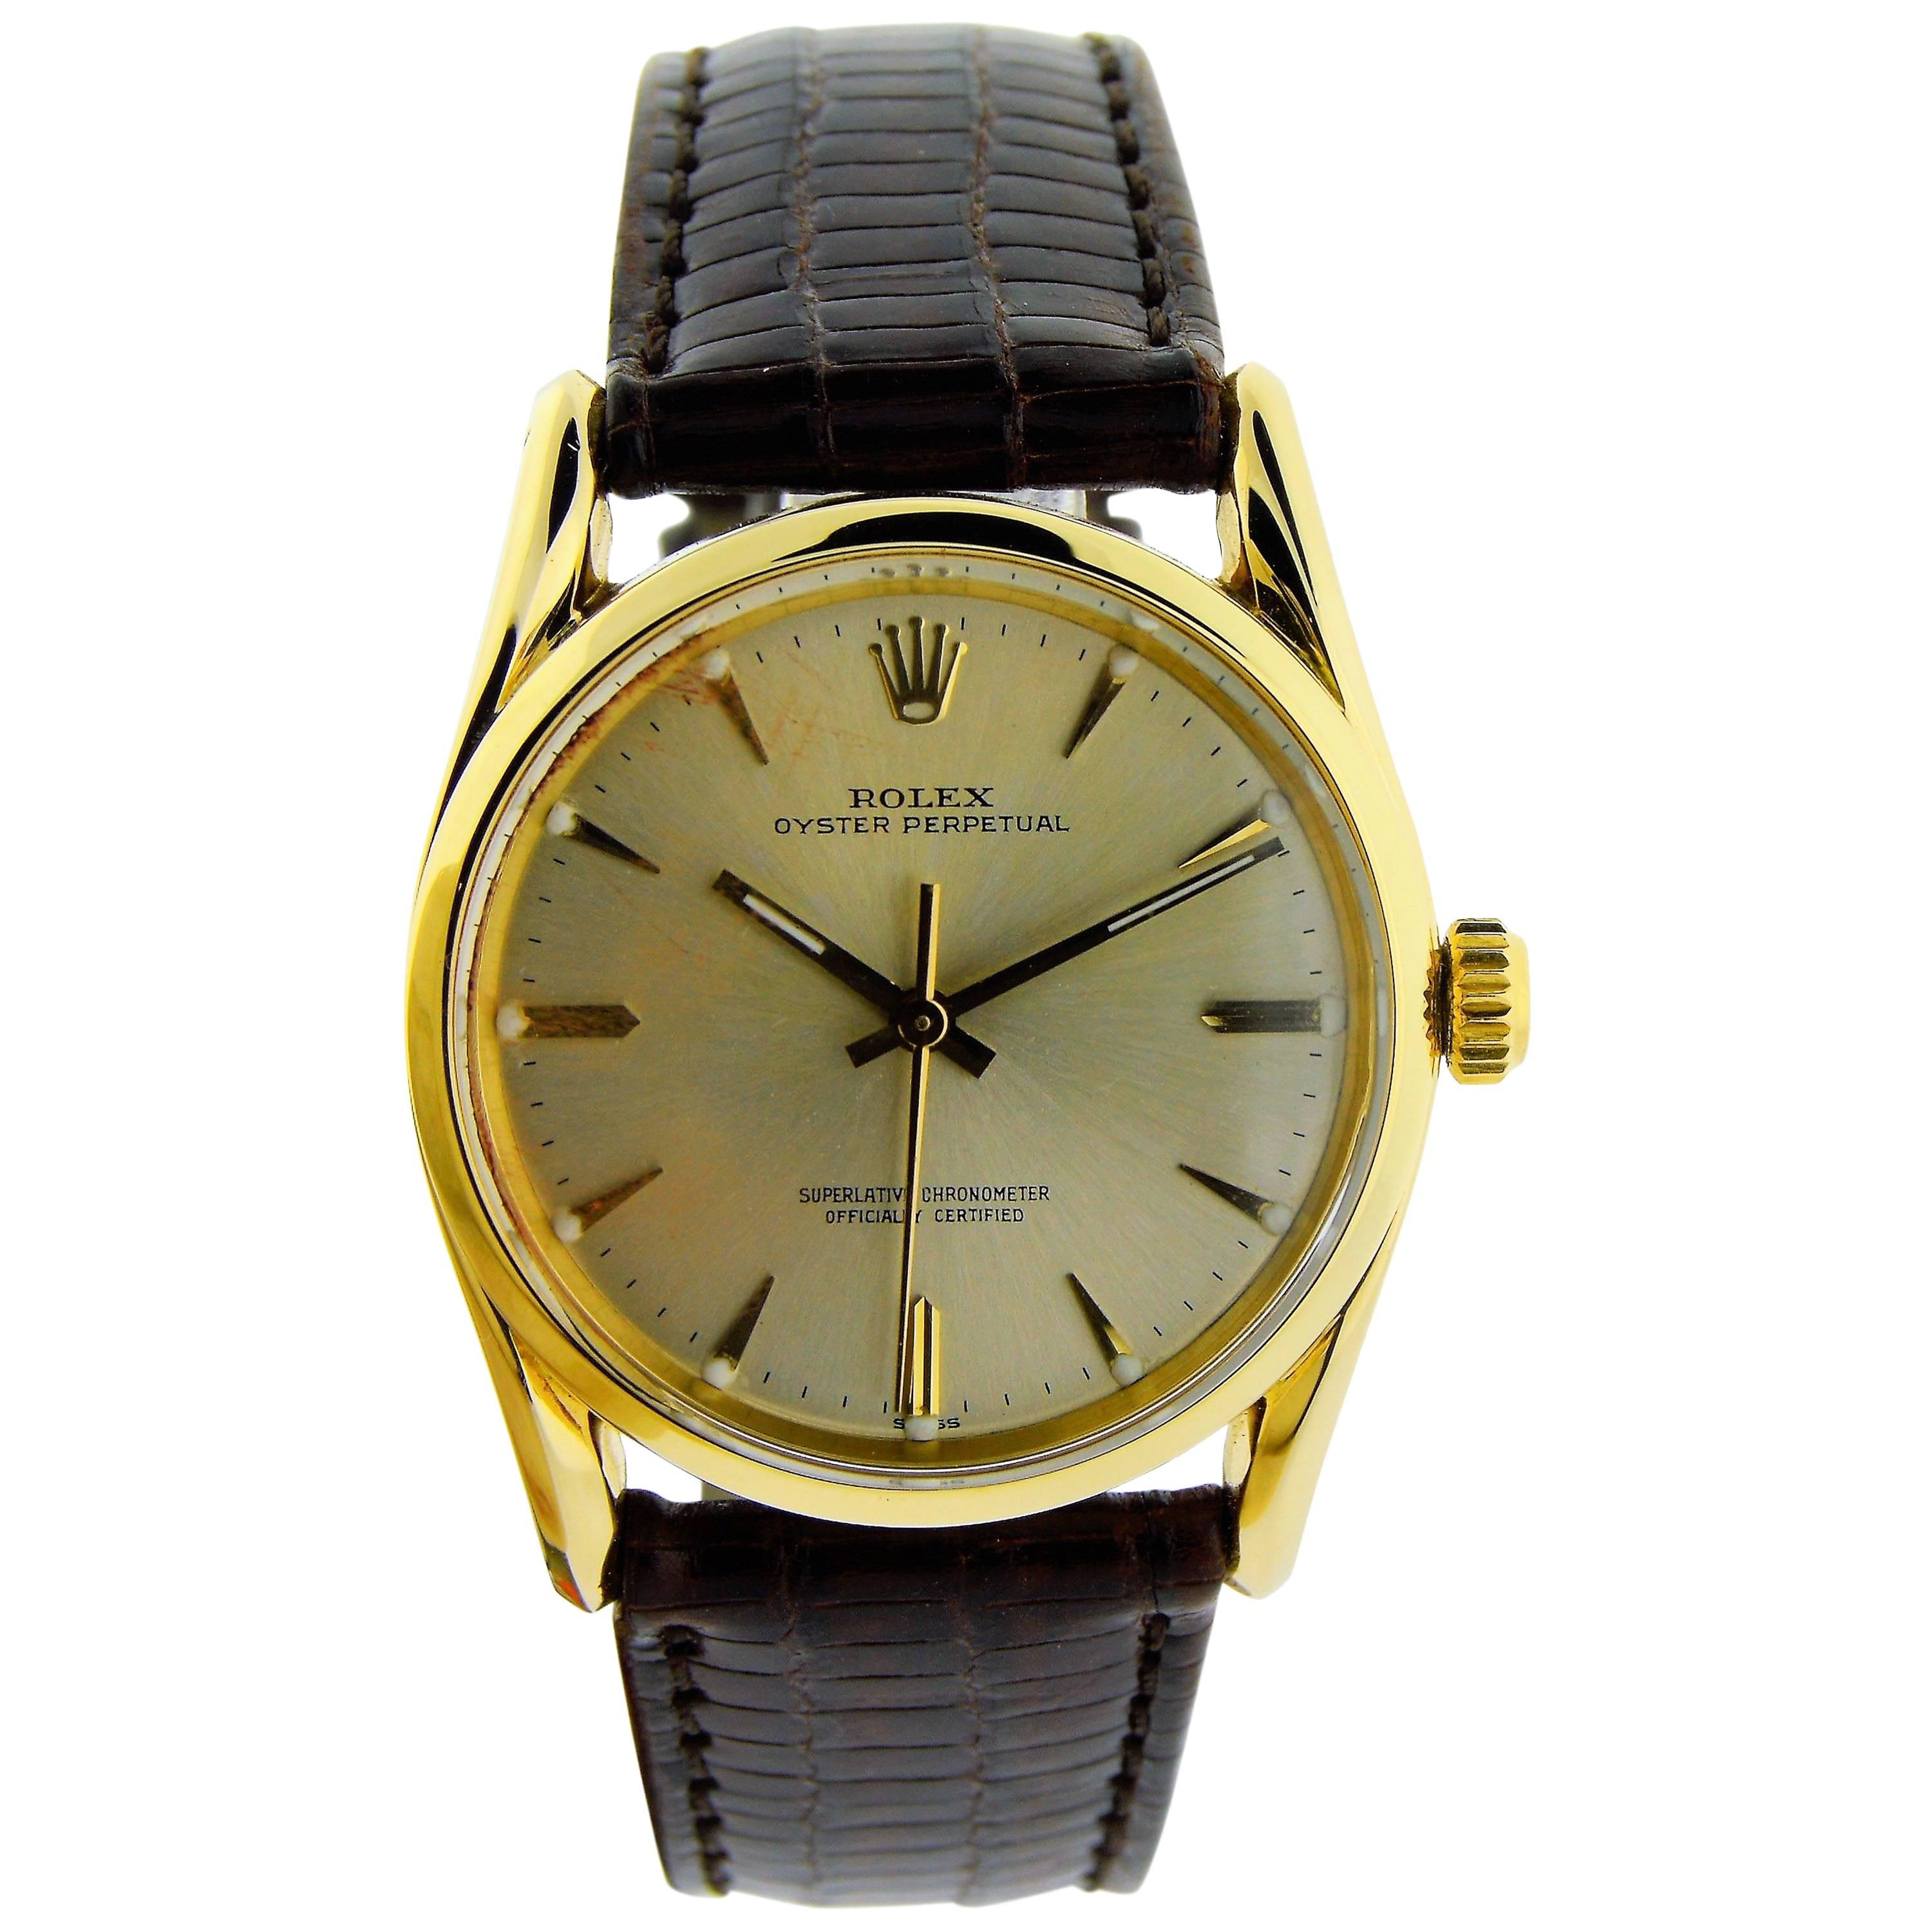 Rolex Solid Yellow Gold Oyster Perpetual Bombe Style Watch